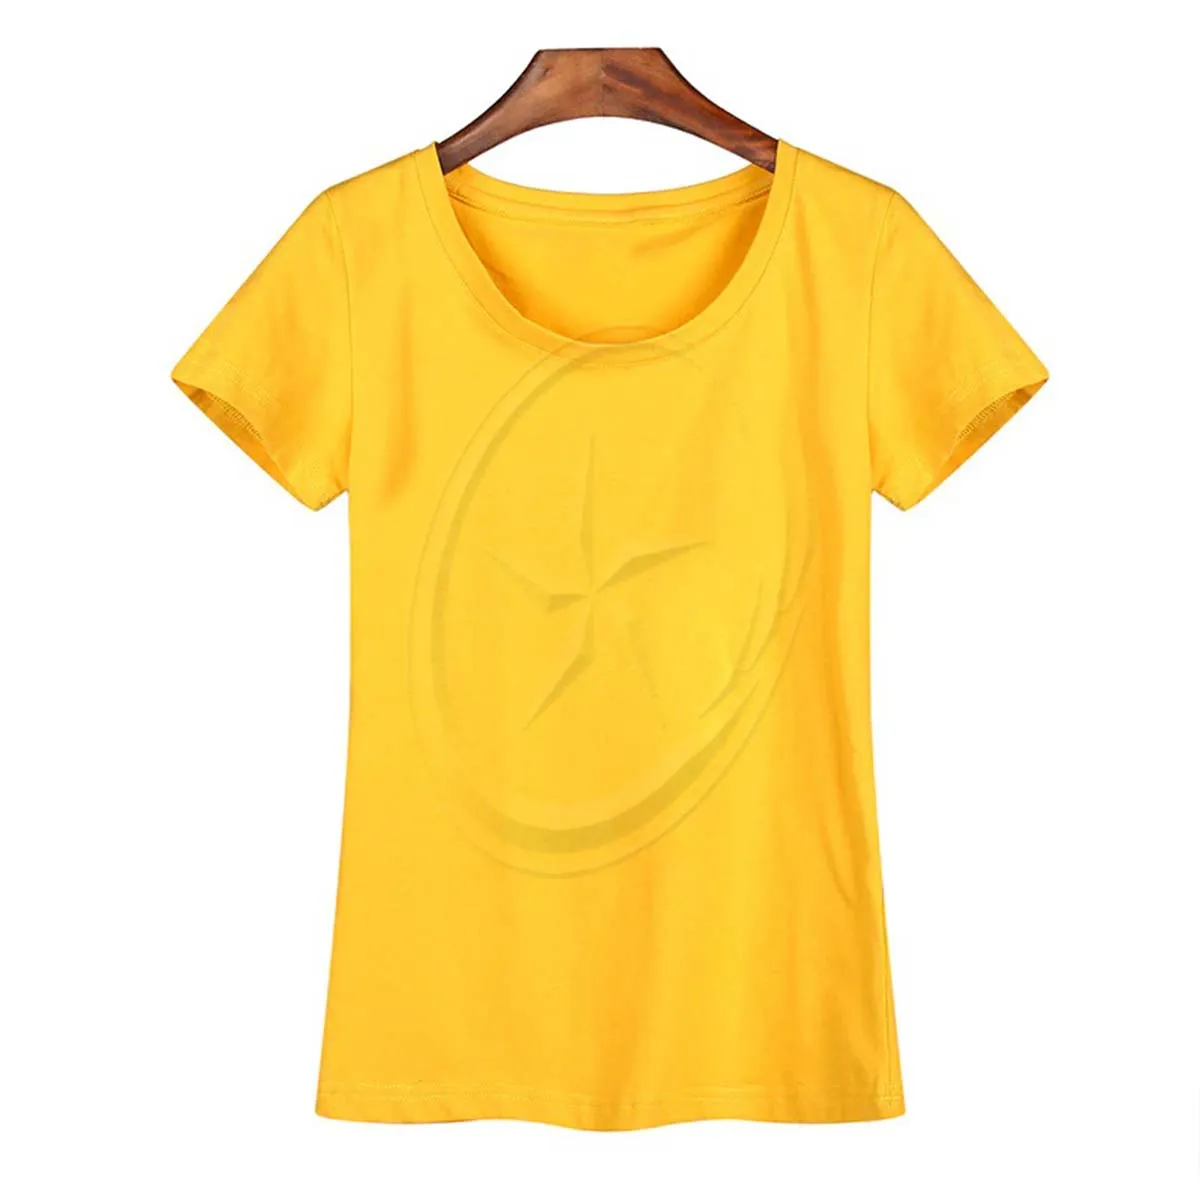 Thin Tshirt For Female Tees Clothes OEM Women's Brand New T-shirt Low V-Neck Women T-shirts Tight-Fitting Woman T Shirt